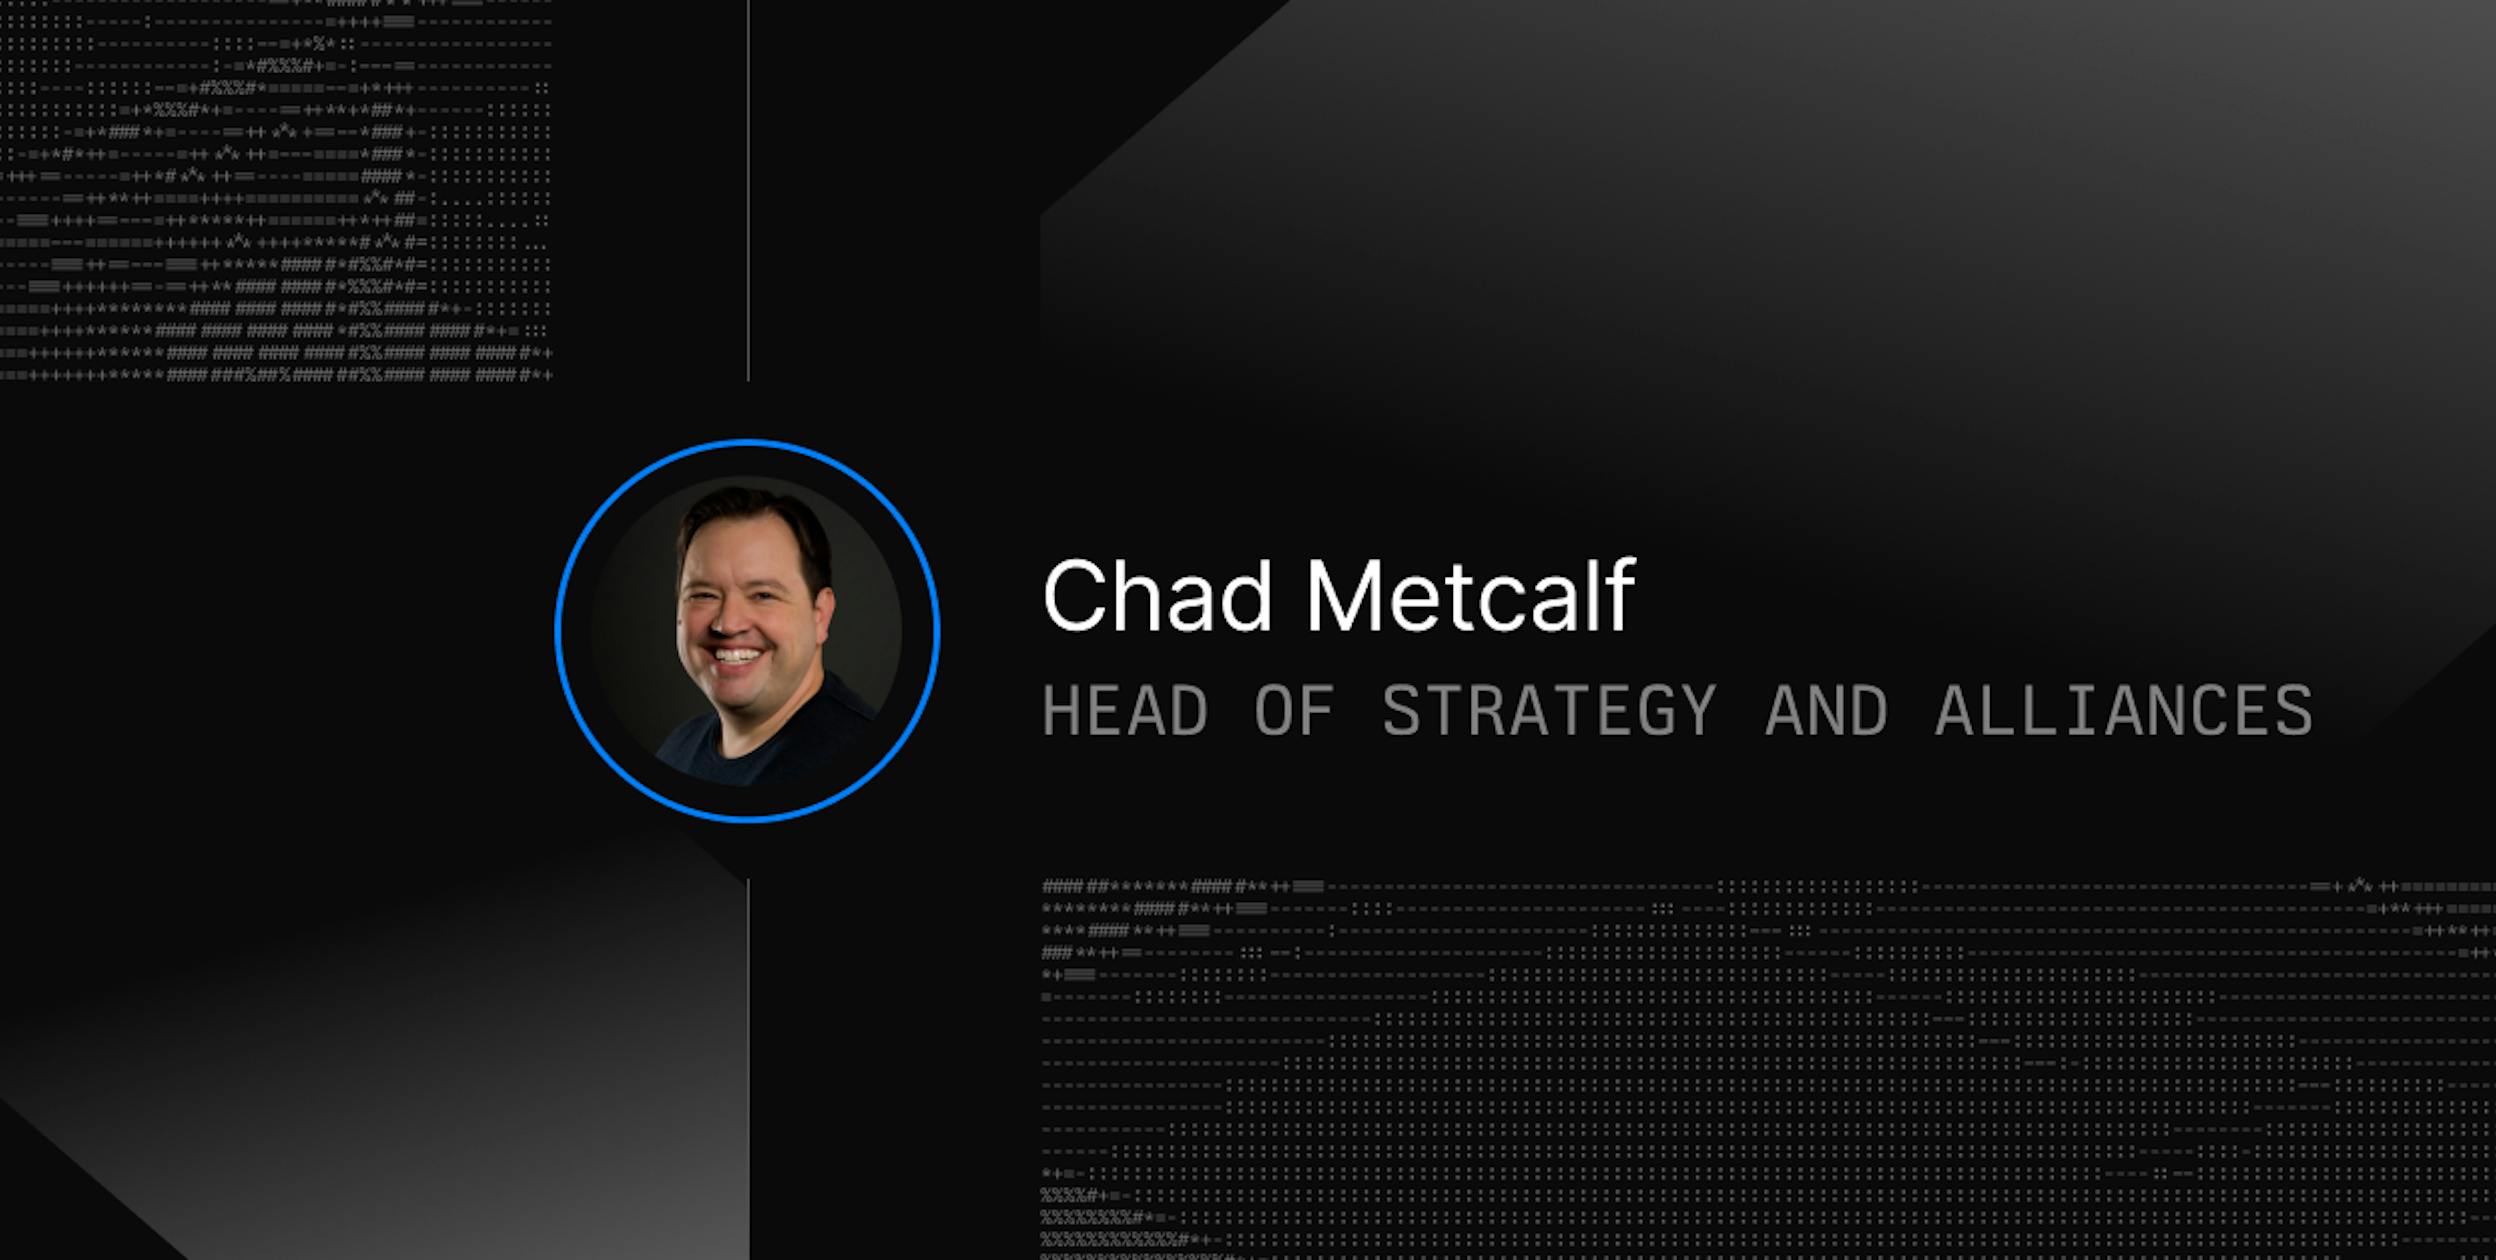 Meet Chad Metcalf, Our Head of Strategy and Alliances